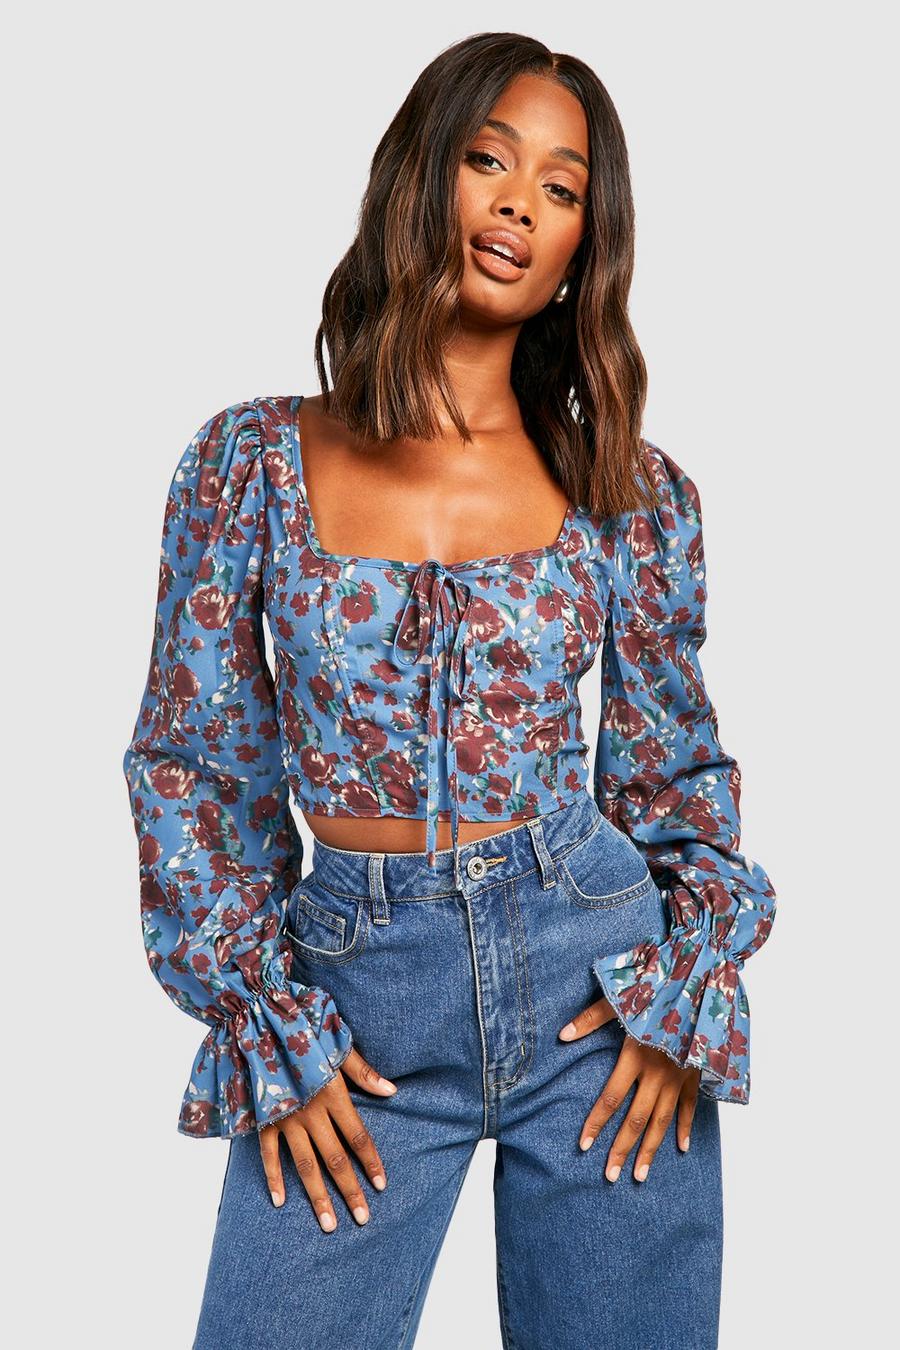 Floral Tops, Ditsy Floral Blouses & Shirts